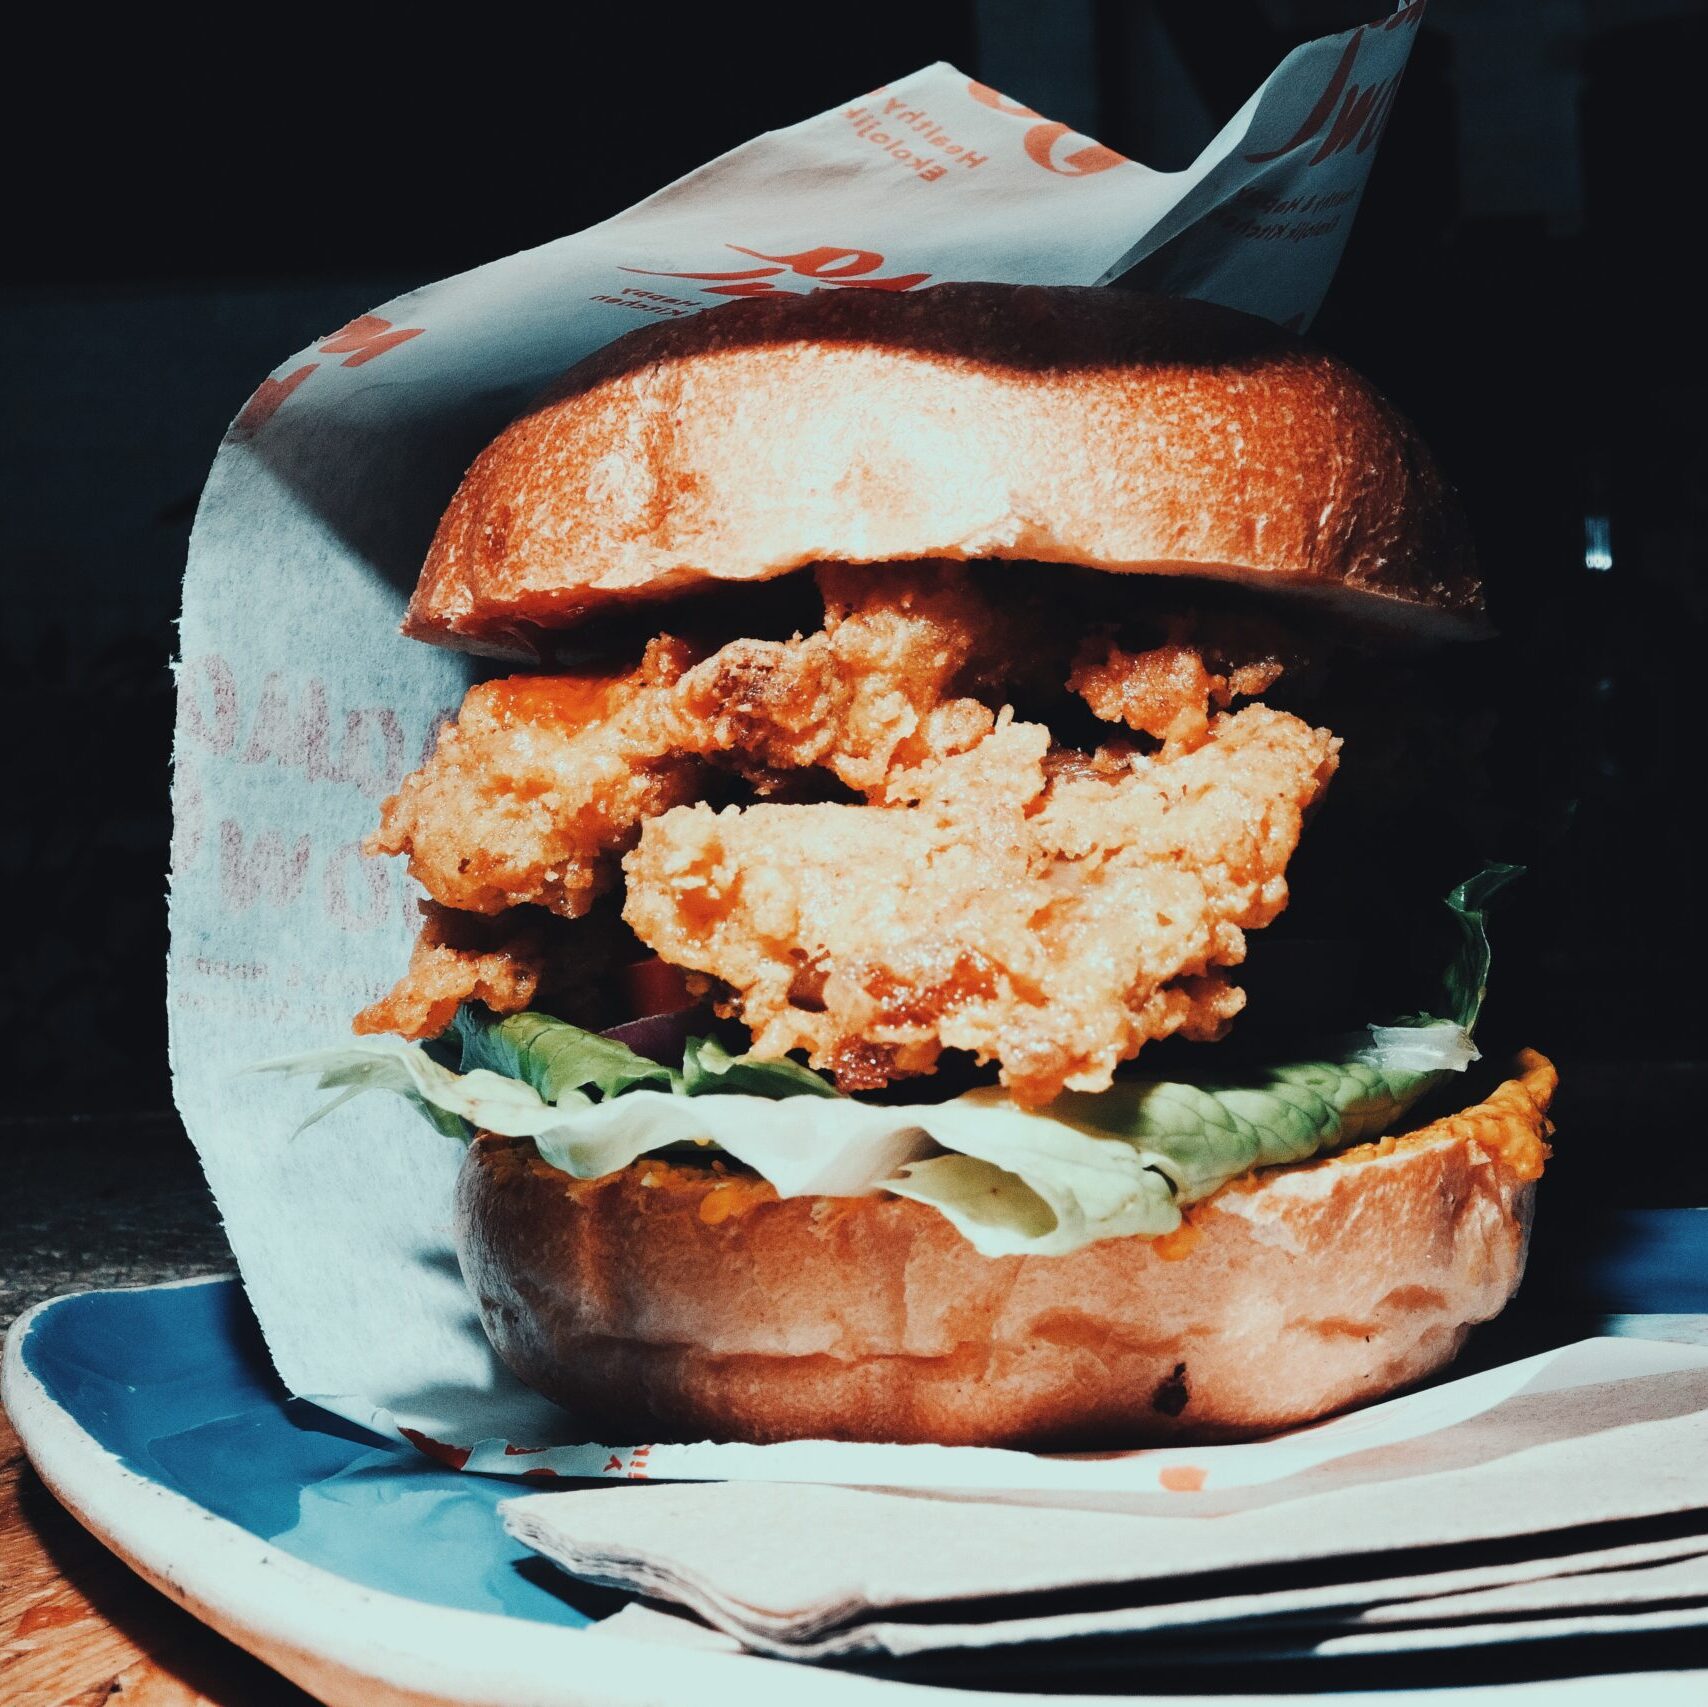 A close-up of a vegan burger with crispy fried patty, lettuce, and a toasted bun, served on a blue plate.